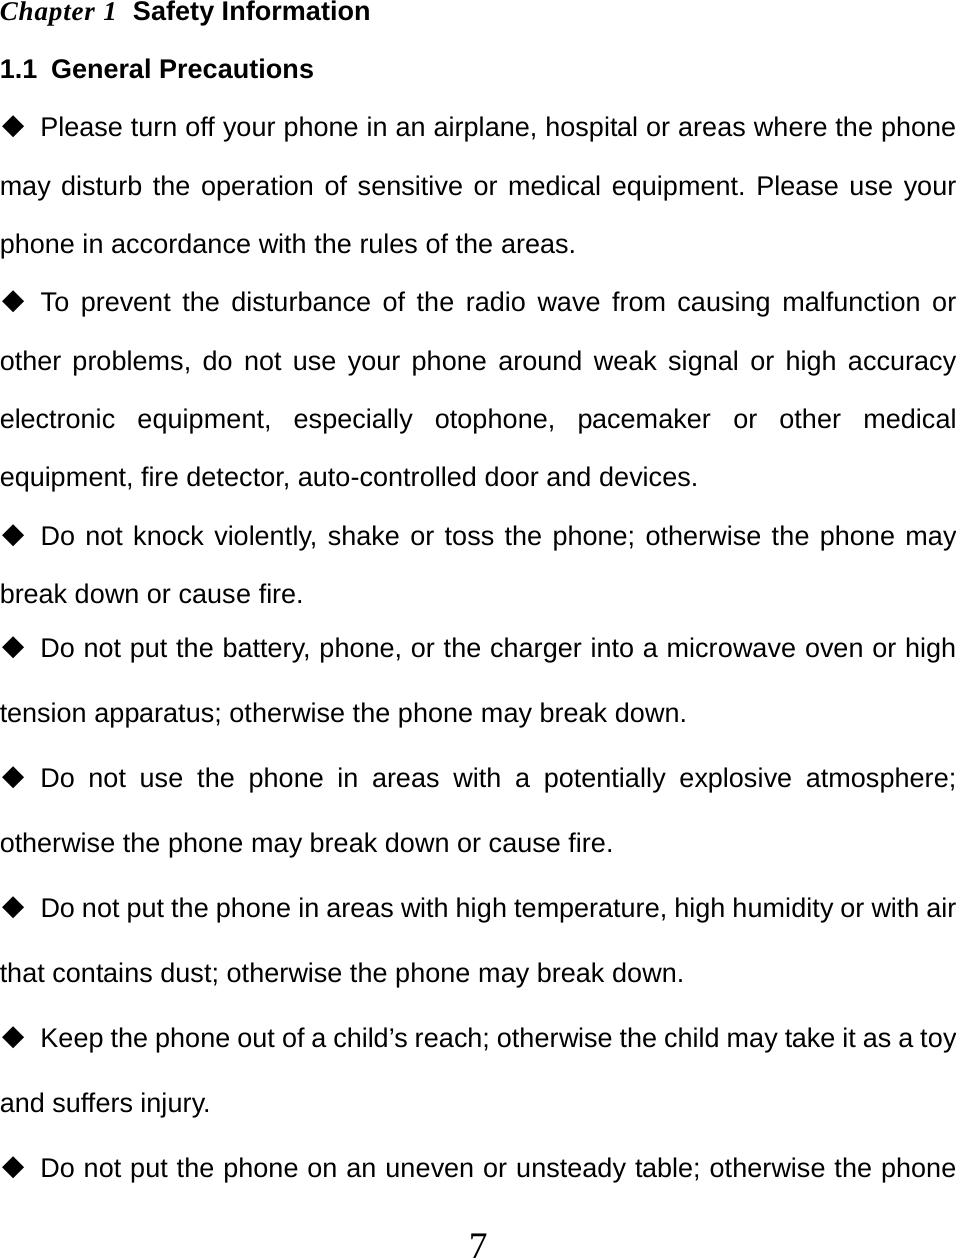   7 Chapter 1  Safety Information 1.1 General Precautions   Please turn off your phone in an airplane, hospital or areas where the phone may disturb the operation of sensitive or medical equipment. Please use your phone in accordance with the rules of the areas.  To prevent the disturbance of the radio wave from causing malfunction or other problems, do not use your phone around weak signal or high accuracy electronic equipment, especially otophone, pacemaker or other medical equipment, fire detector, auto-controlled door and devices.  Do not knock violently, shake or toss the phone; otherwise the phone may break down or cause fire.   Do not put the battery, phone, or the charger into a microwave oven or high tension apparatus; otherwise the phone may break down.  Do not use the phone in areas with a potentially explosive atmosphere; otherwise the phone may break down or cause fire.   Do not put the phone in areas with high temperature, high humidity or with air that contains dust; otherwise the phone may break down.   Keep the phone out of a child’s reach; otherwise the child may take it as a toy and suffers injury.   Do not put the phone on an uneven or unsteady table; otherwise the phone 